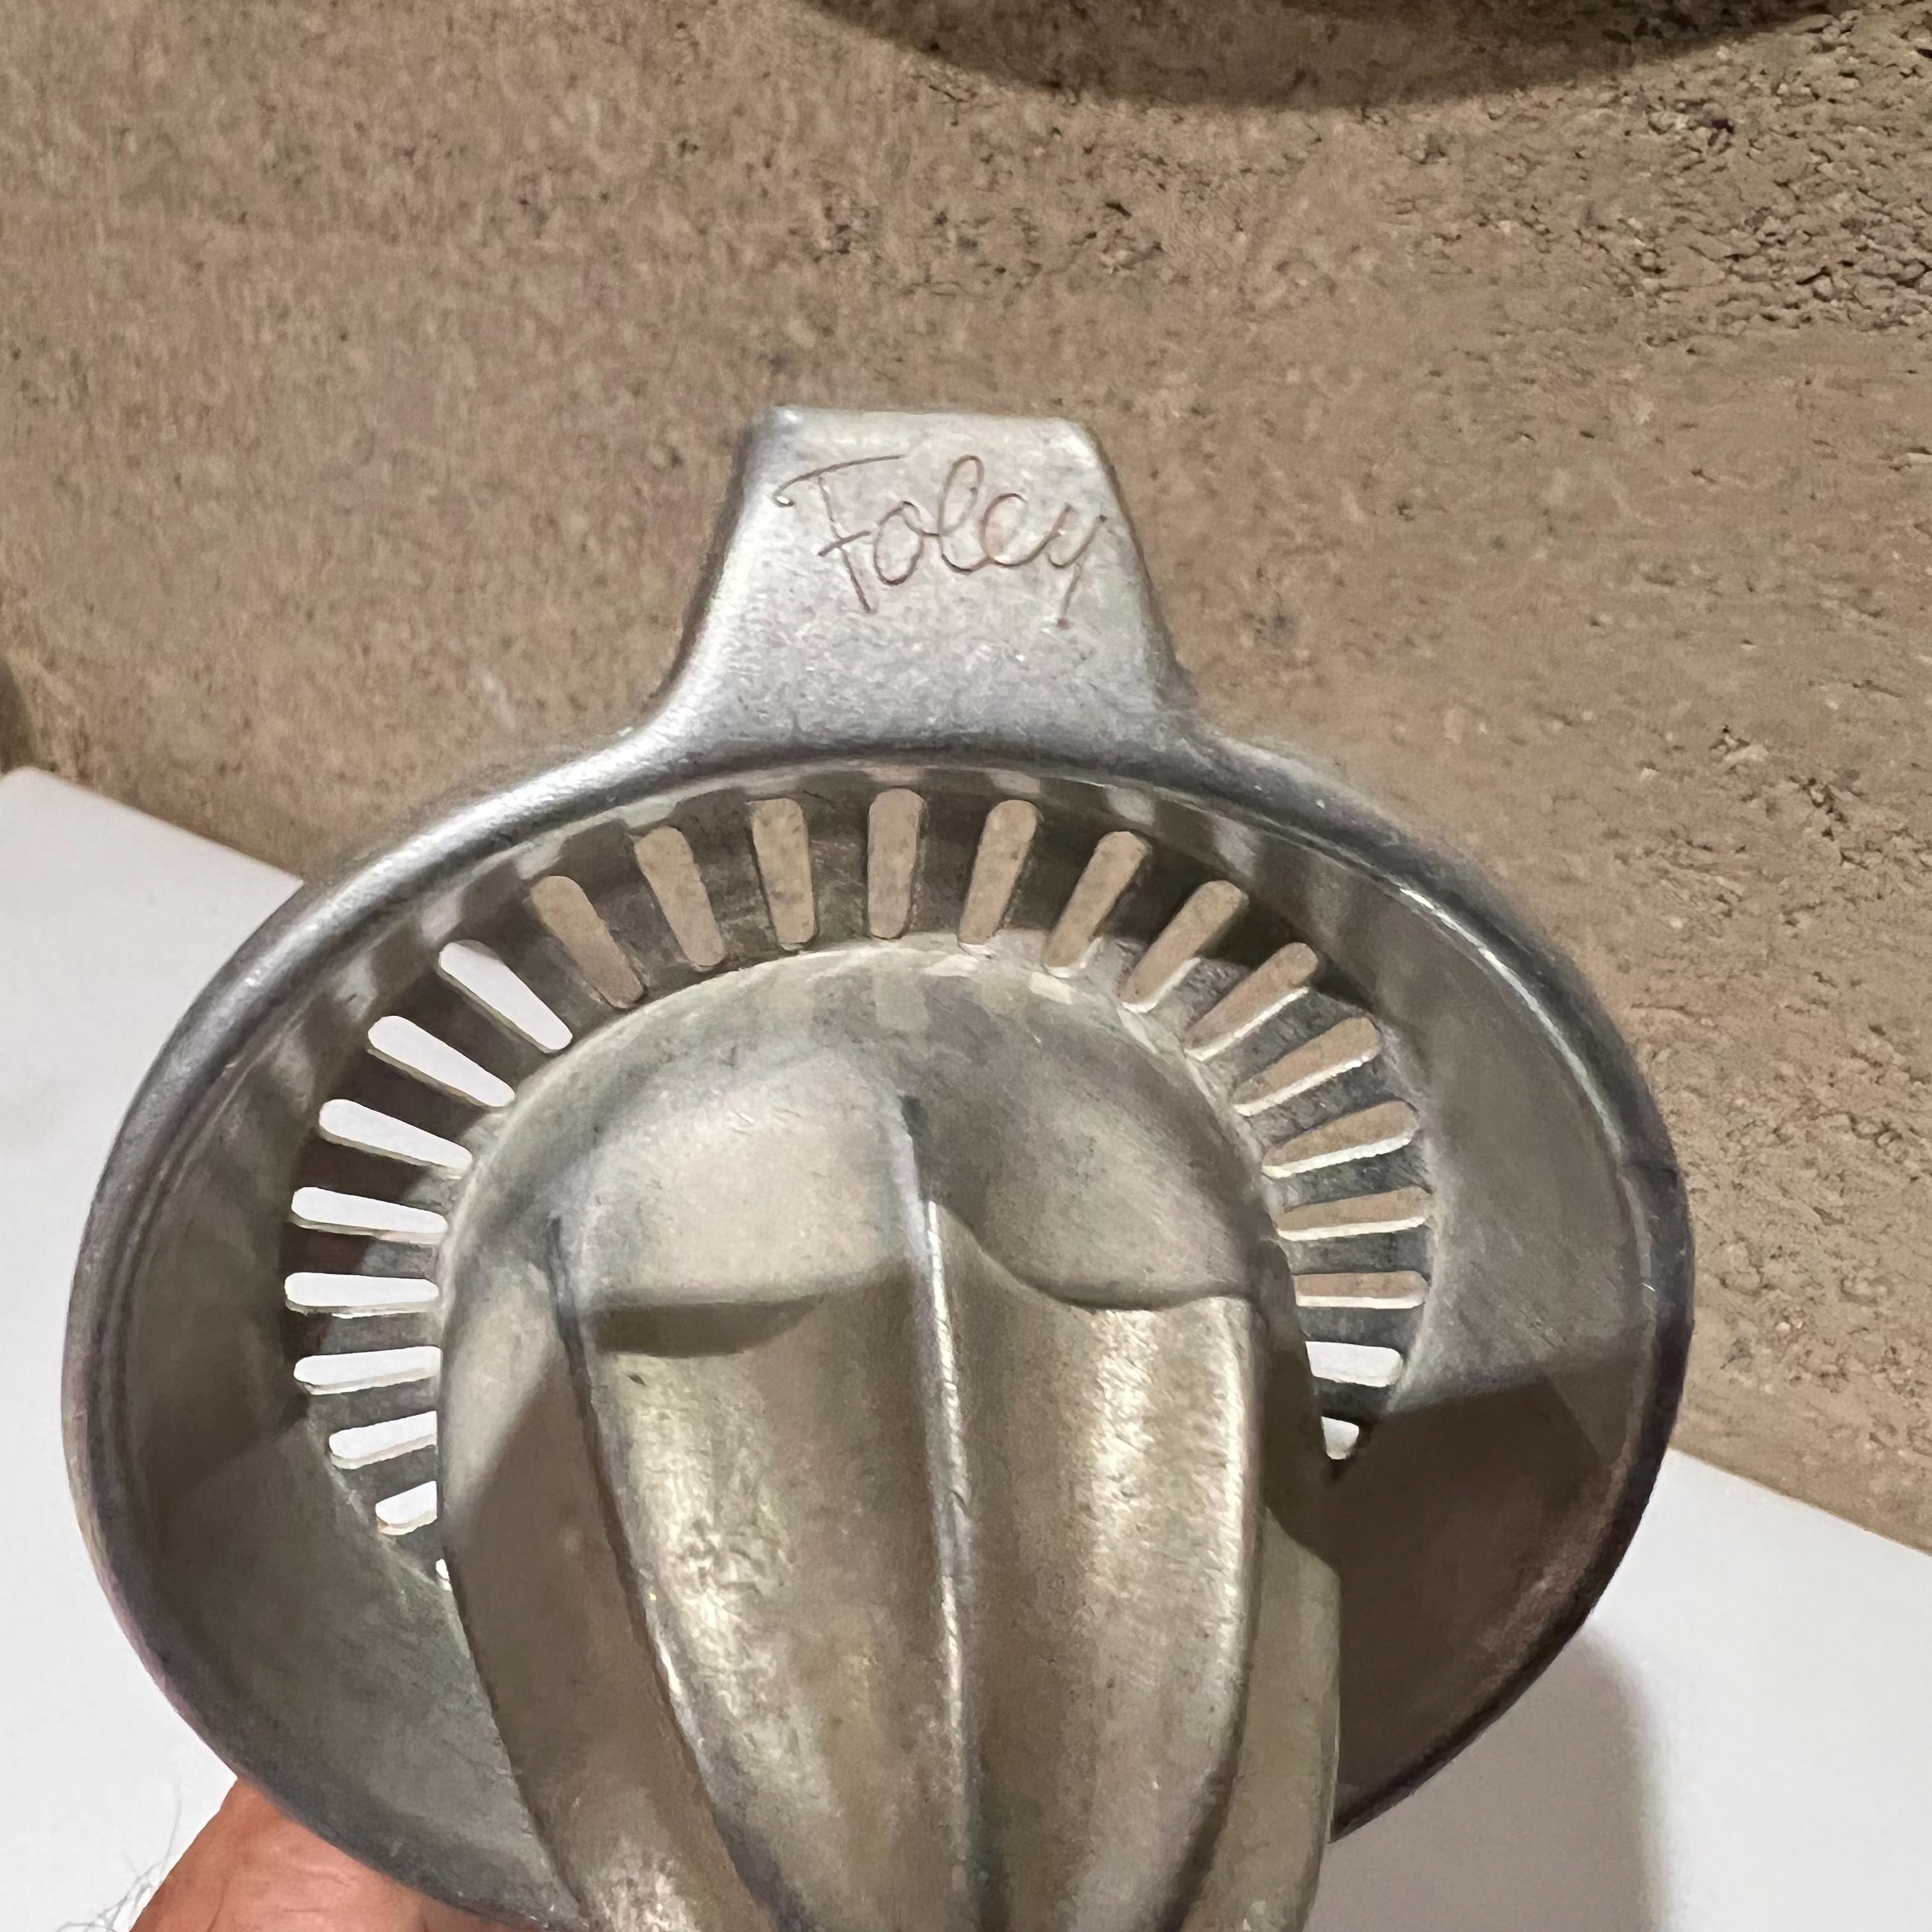 Airstream 1960s Foley Handheld Citrus Juicer Reamer in Aluminum In Good Condition For Sale In Chula Vista, CA